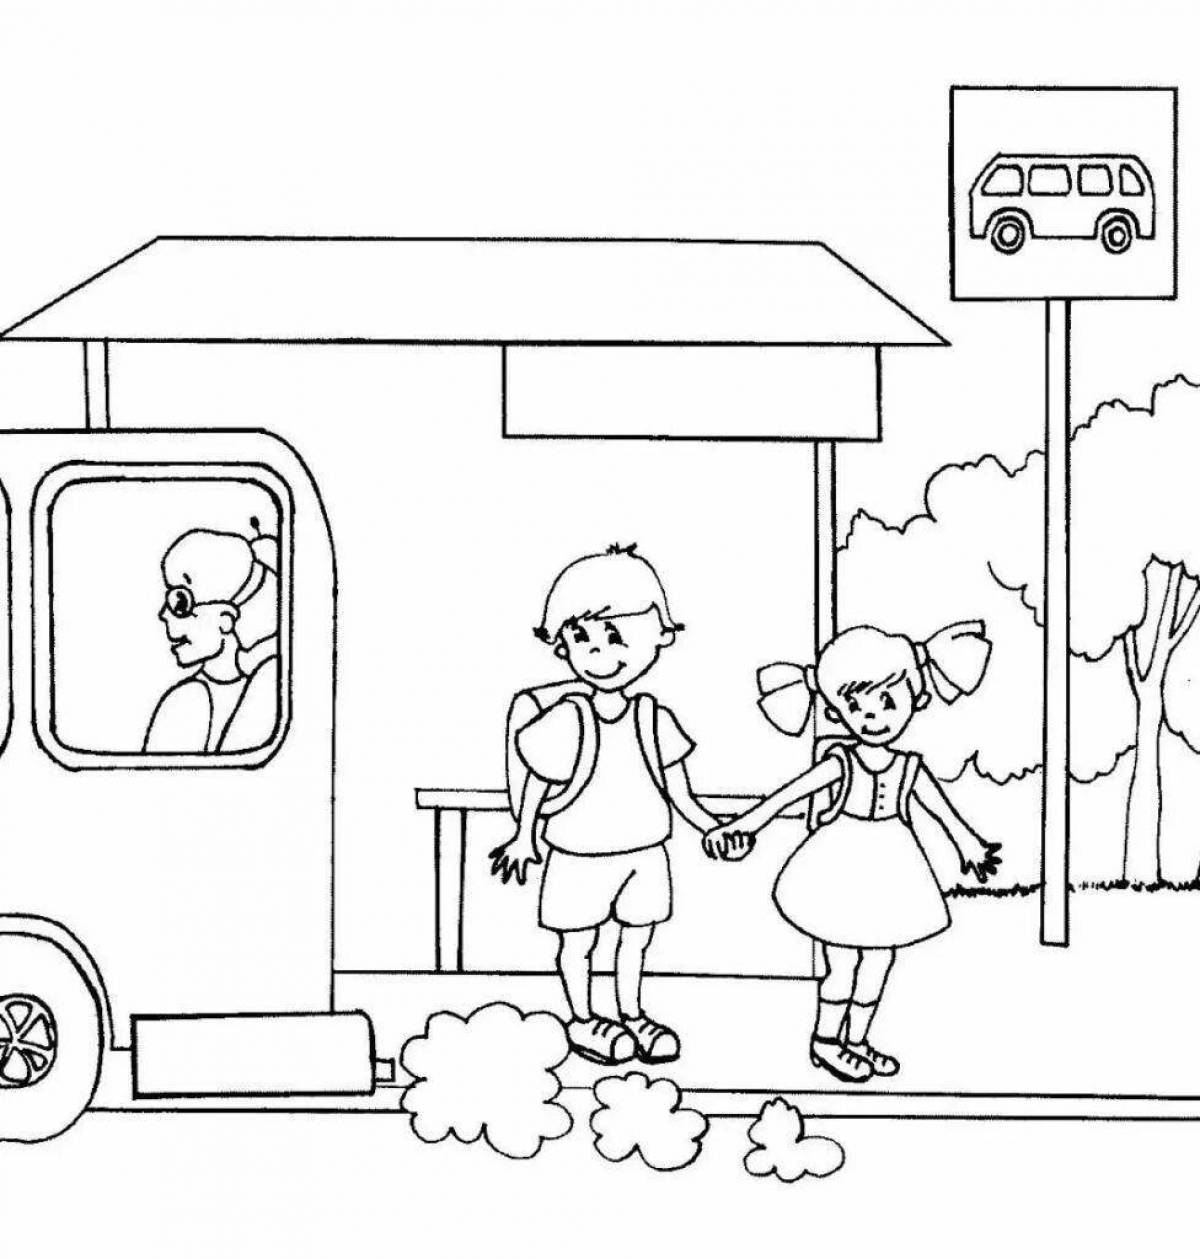 Colour-coded traffic rules coloring book for preschoolers